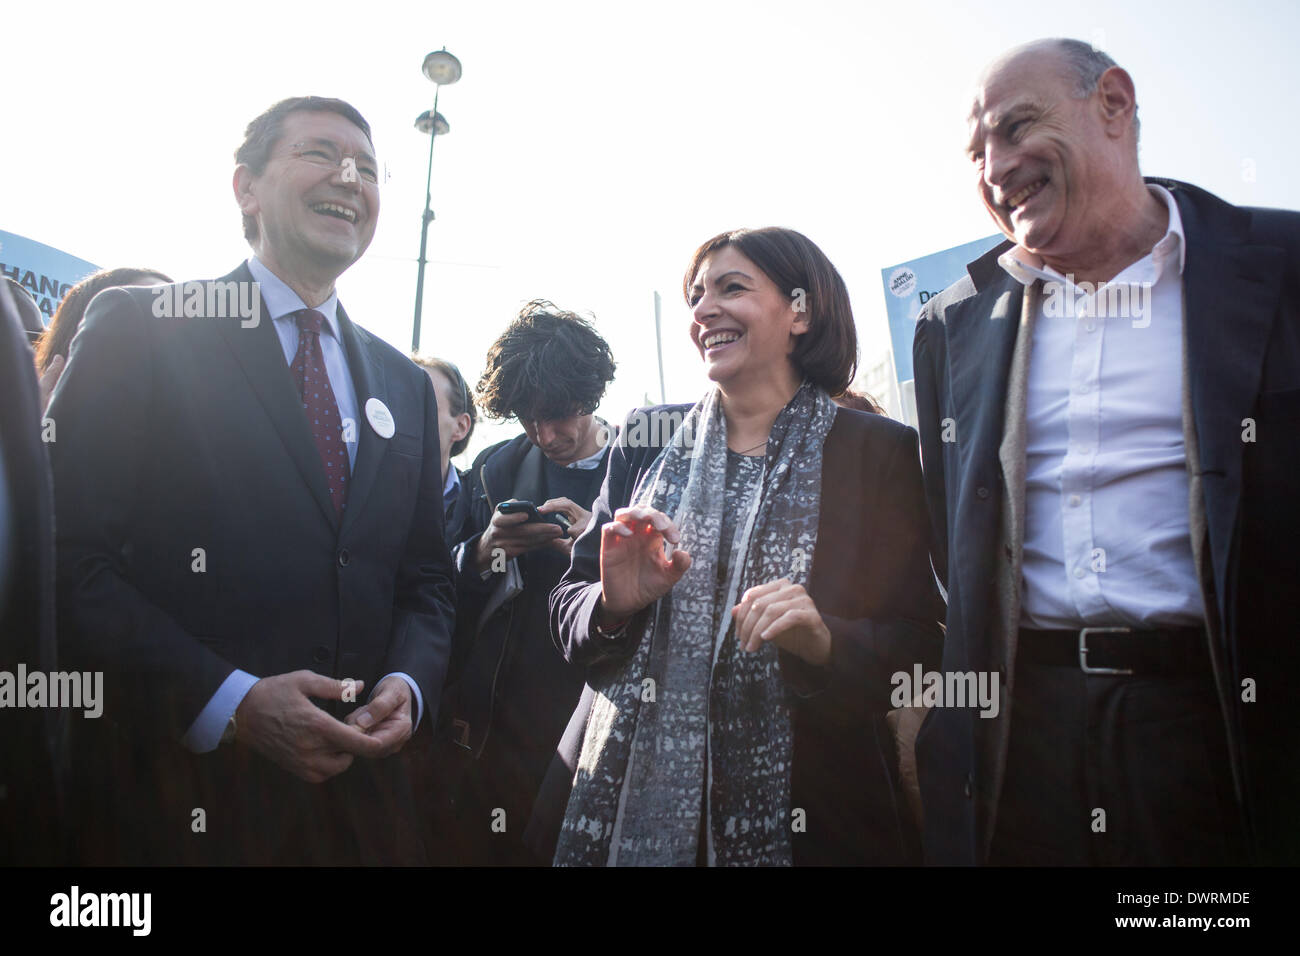 Paris, France. 12th Mar, 2014. Anne Hidalgo, the Ps candidate for mayor of Paris in 2014, with the mayor of Rome, Ignazio Marino and Jerome Coumet, tops the list in the 13th arrondissement of Paris. The appointment was set up in Italy's square to present plans for future renovations. Credit:  Michael Bunel/NurPhoto/ZUMAPRESS.com/Alamy Live News Stock Photo